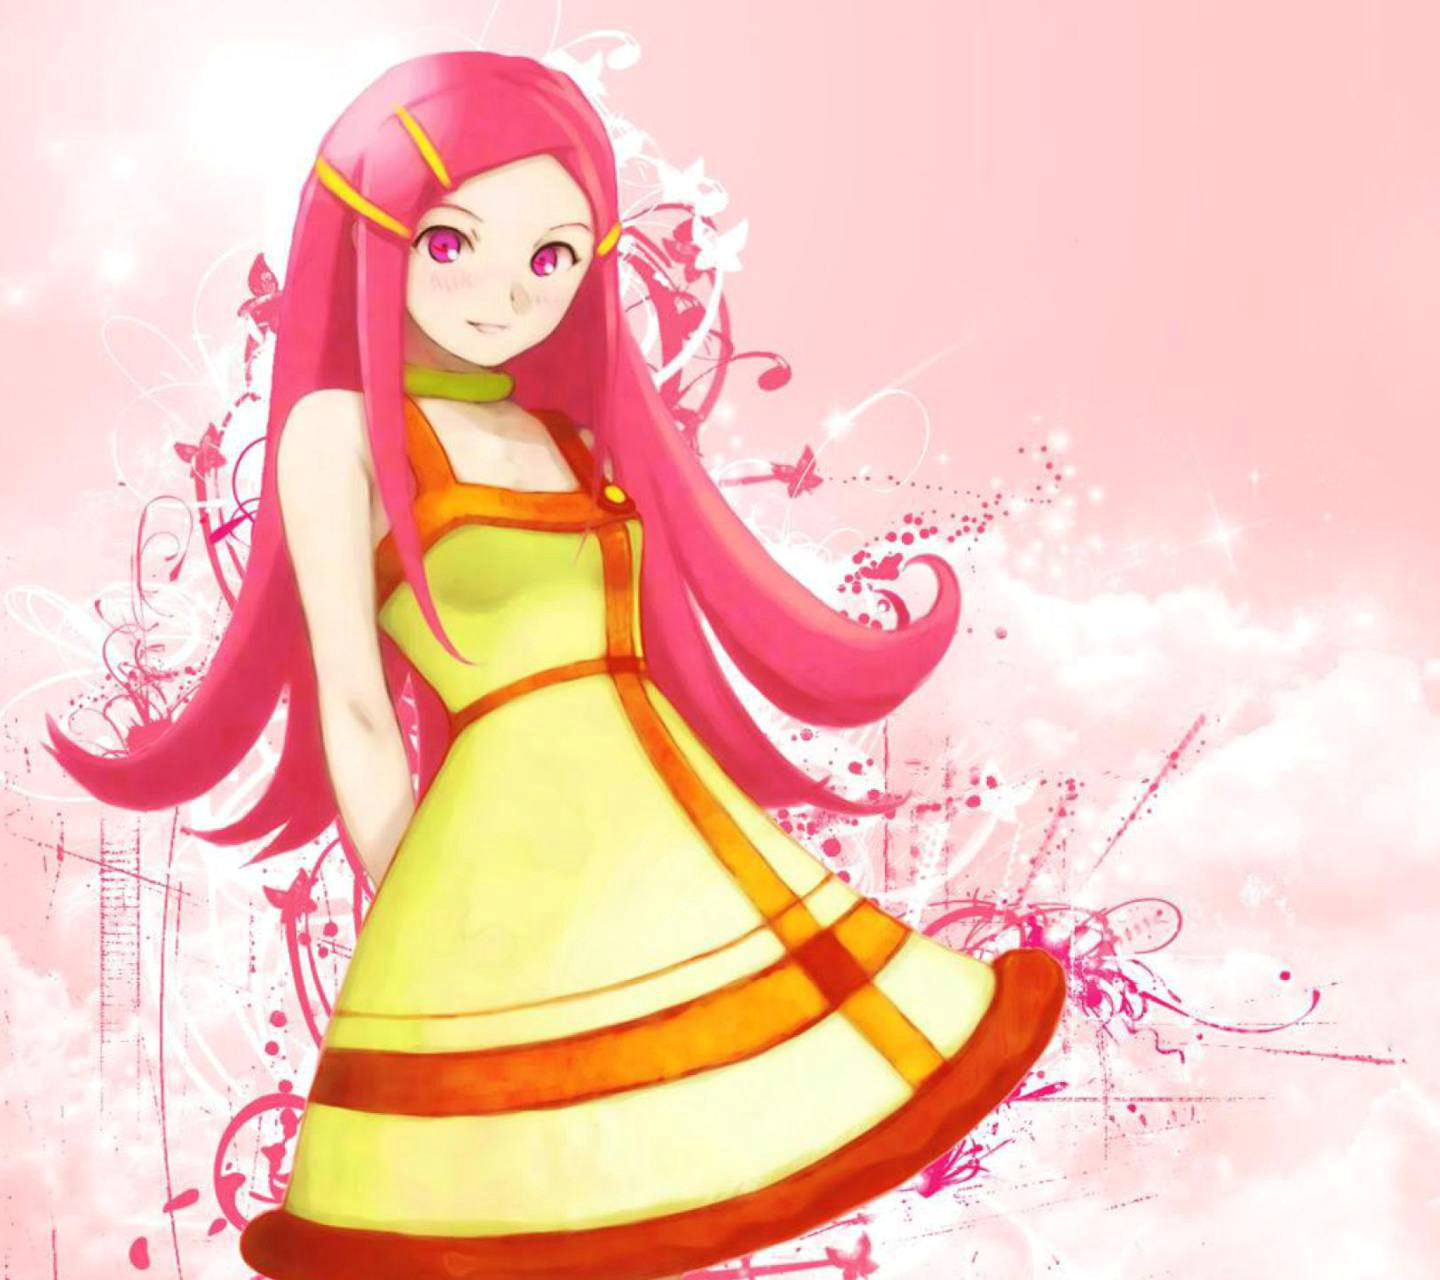 Free Anime Drawing Beautiful Anime Girl Wallpaper by Djbattery2012 0d Free